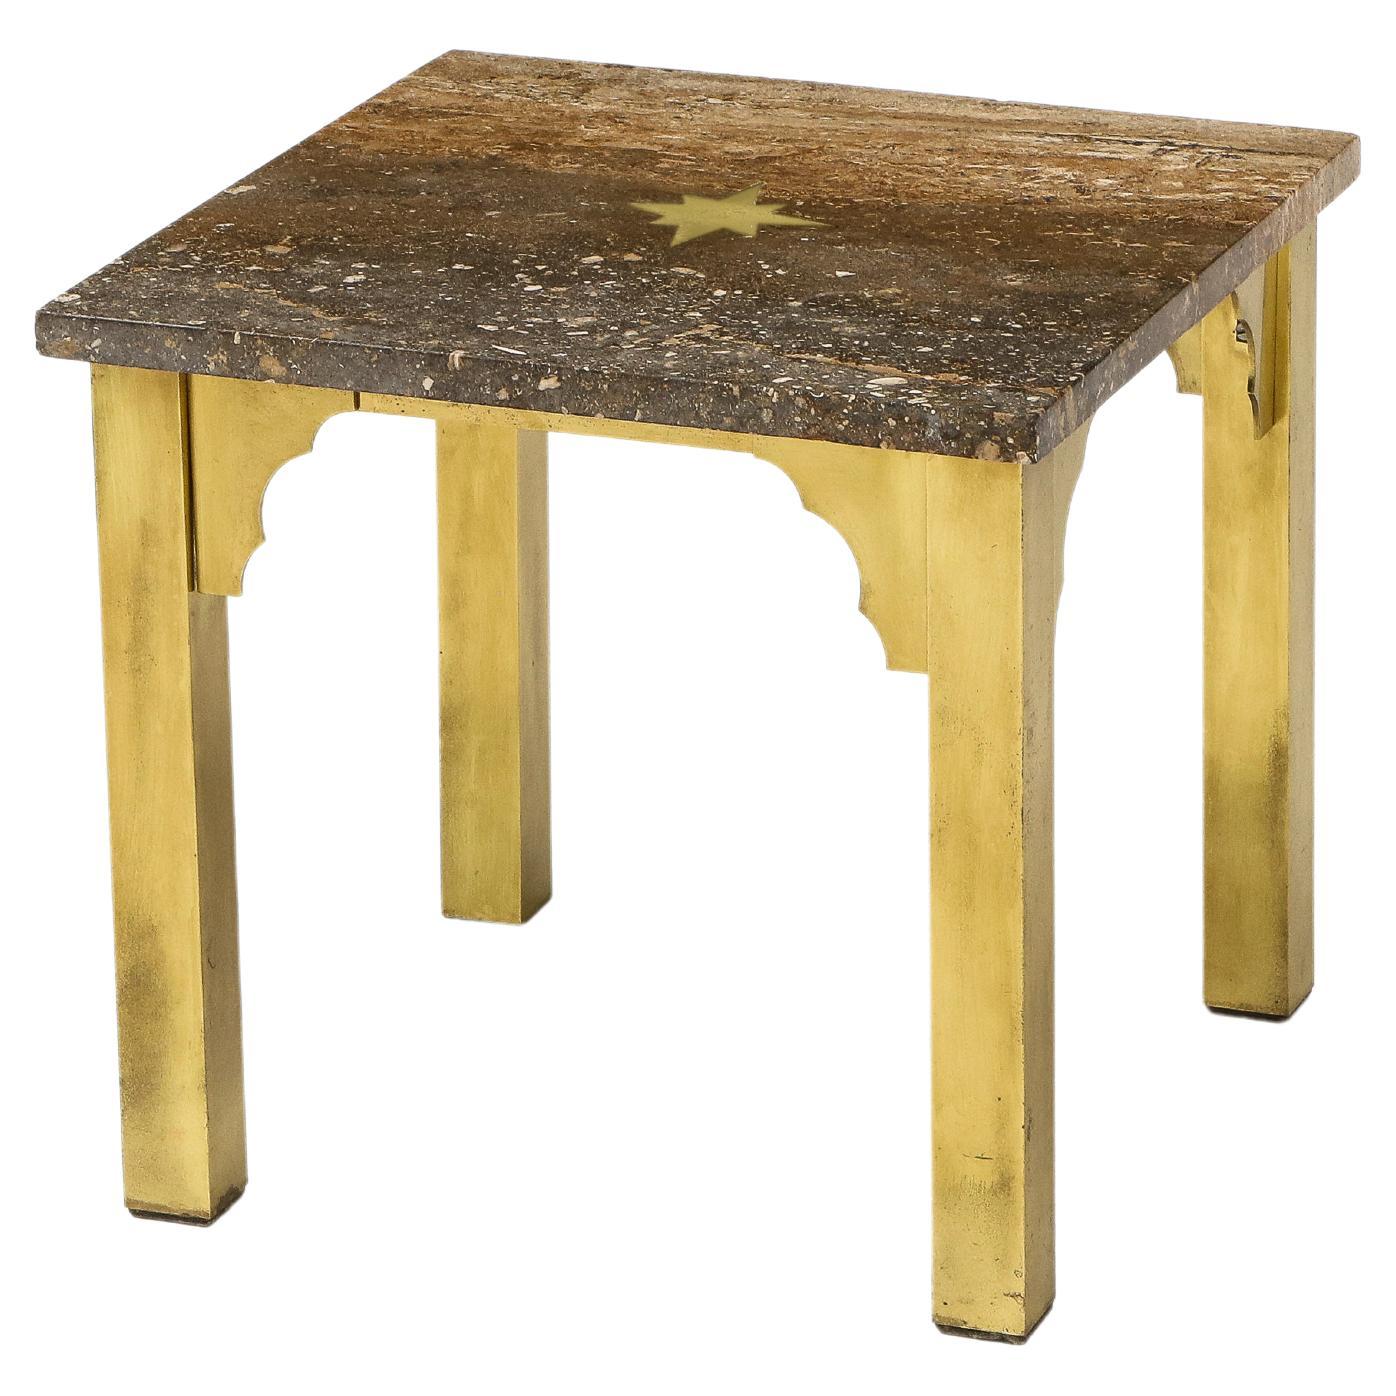 Small Square Table in Brass & Travertine, Inlay & Arabesque Details, USA 1960's